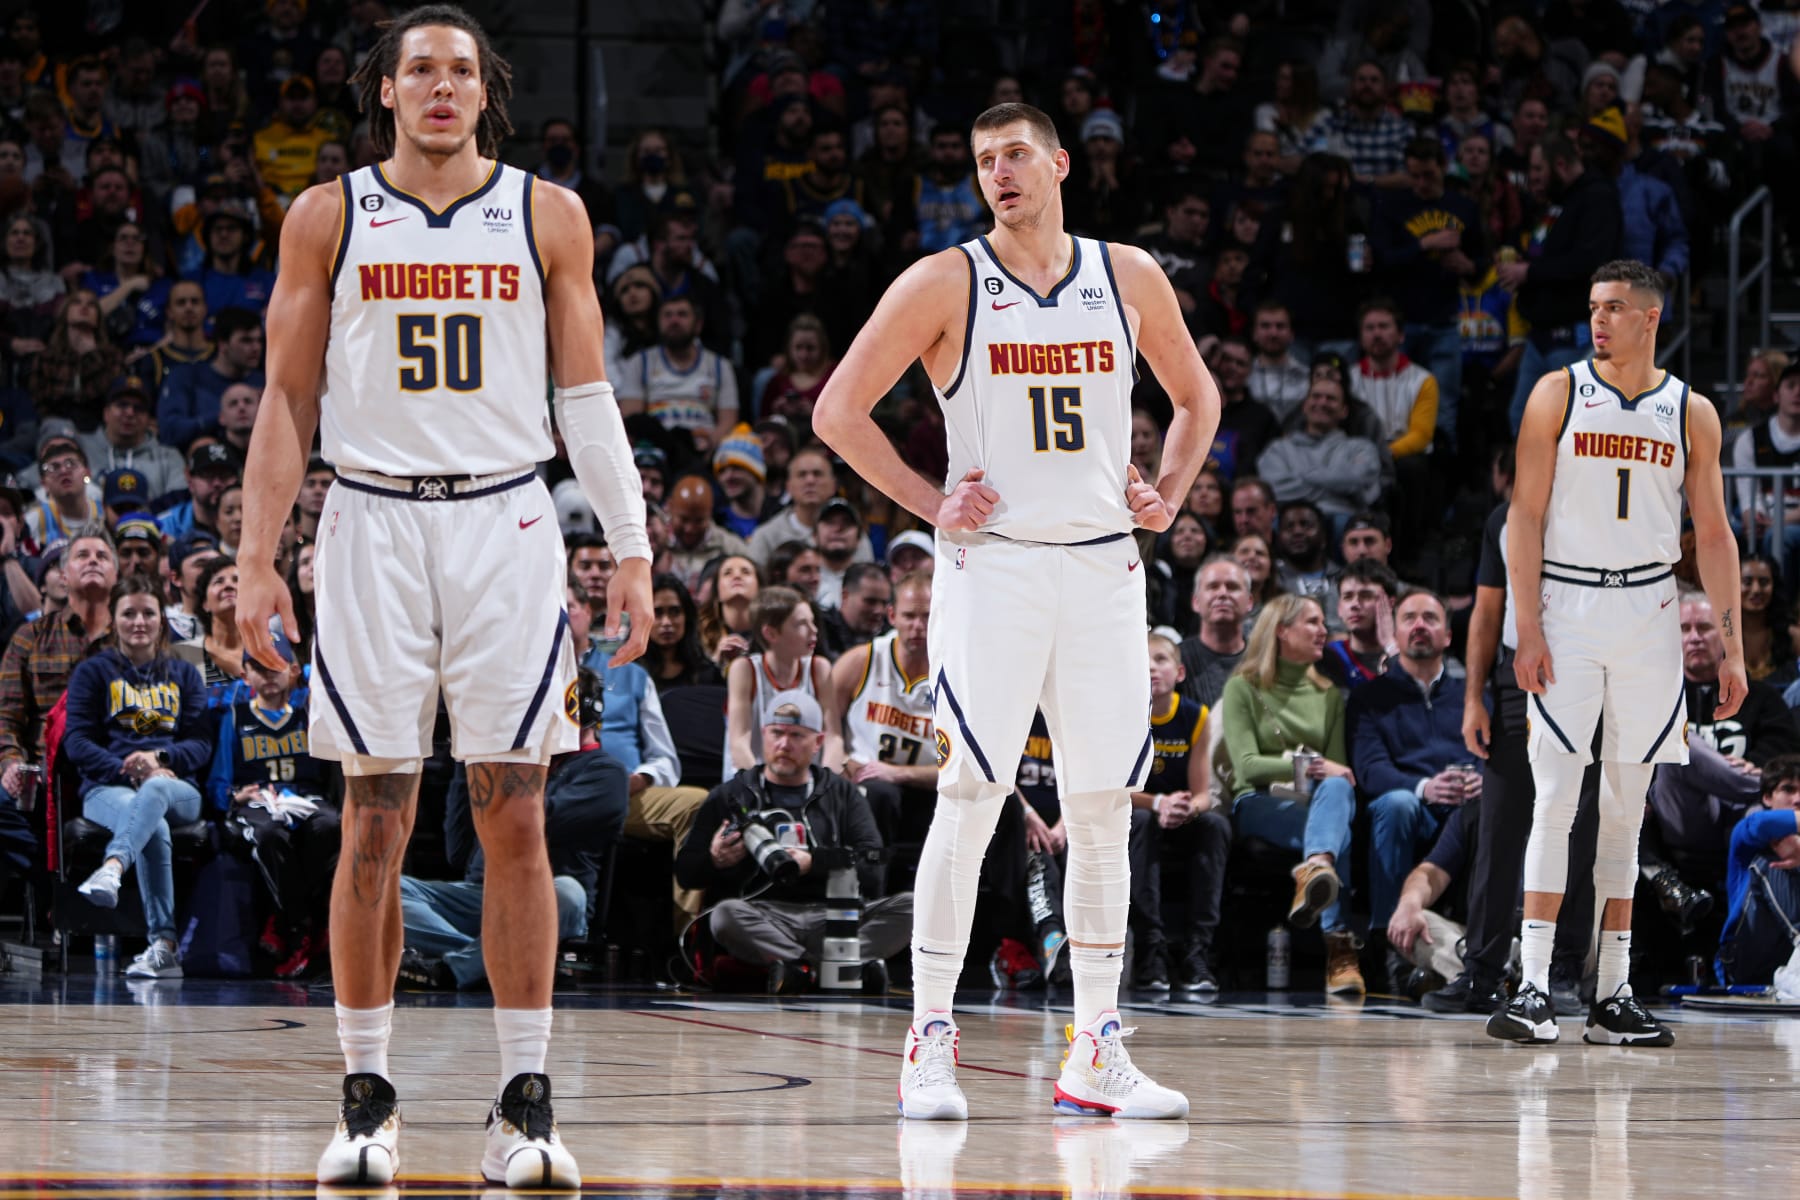 Nuggets shaking off team history, staking claim for first NBA title